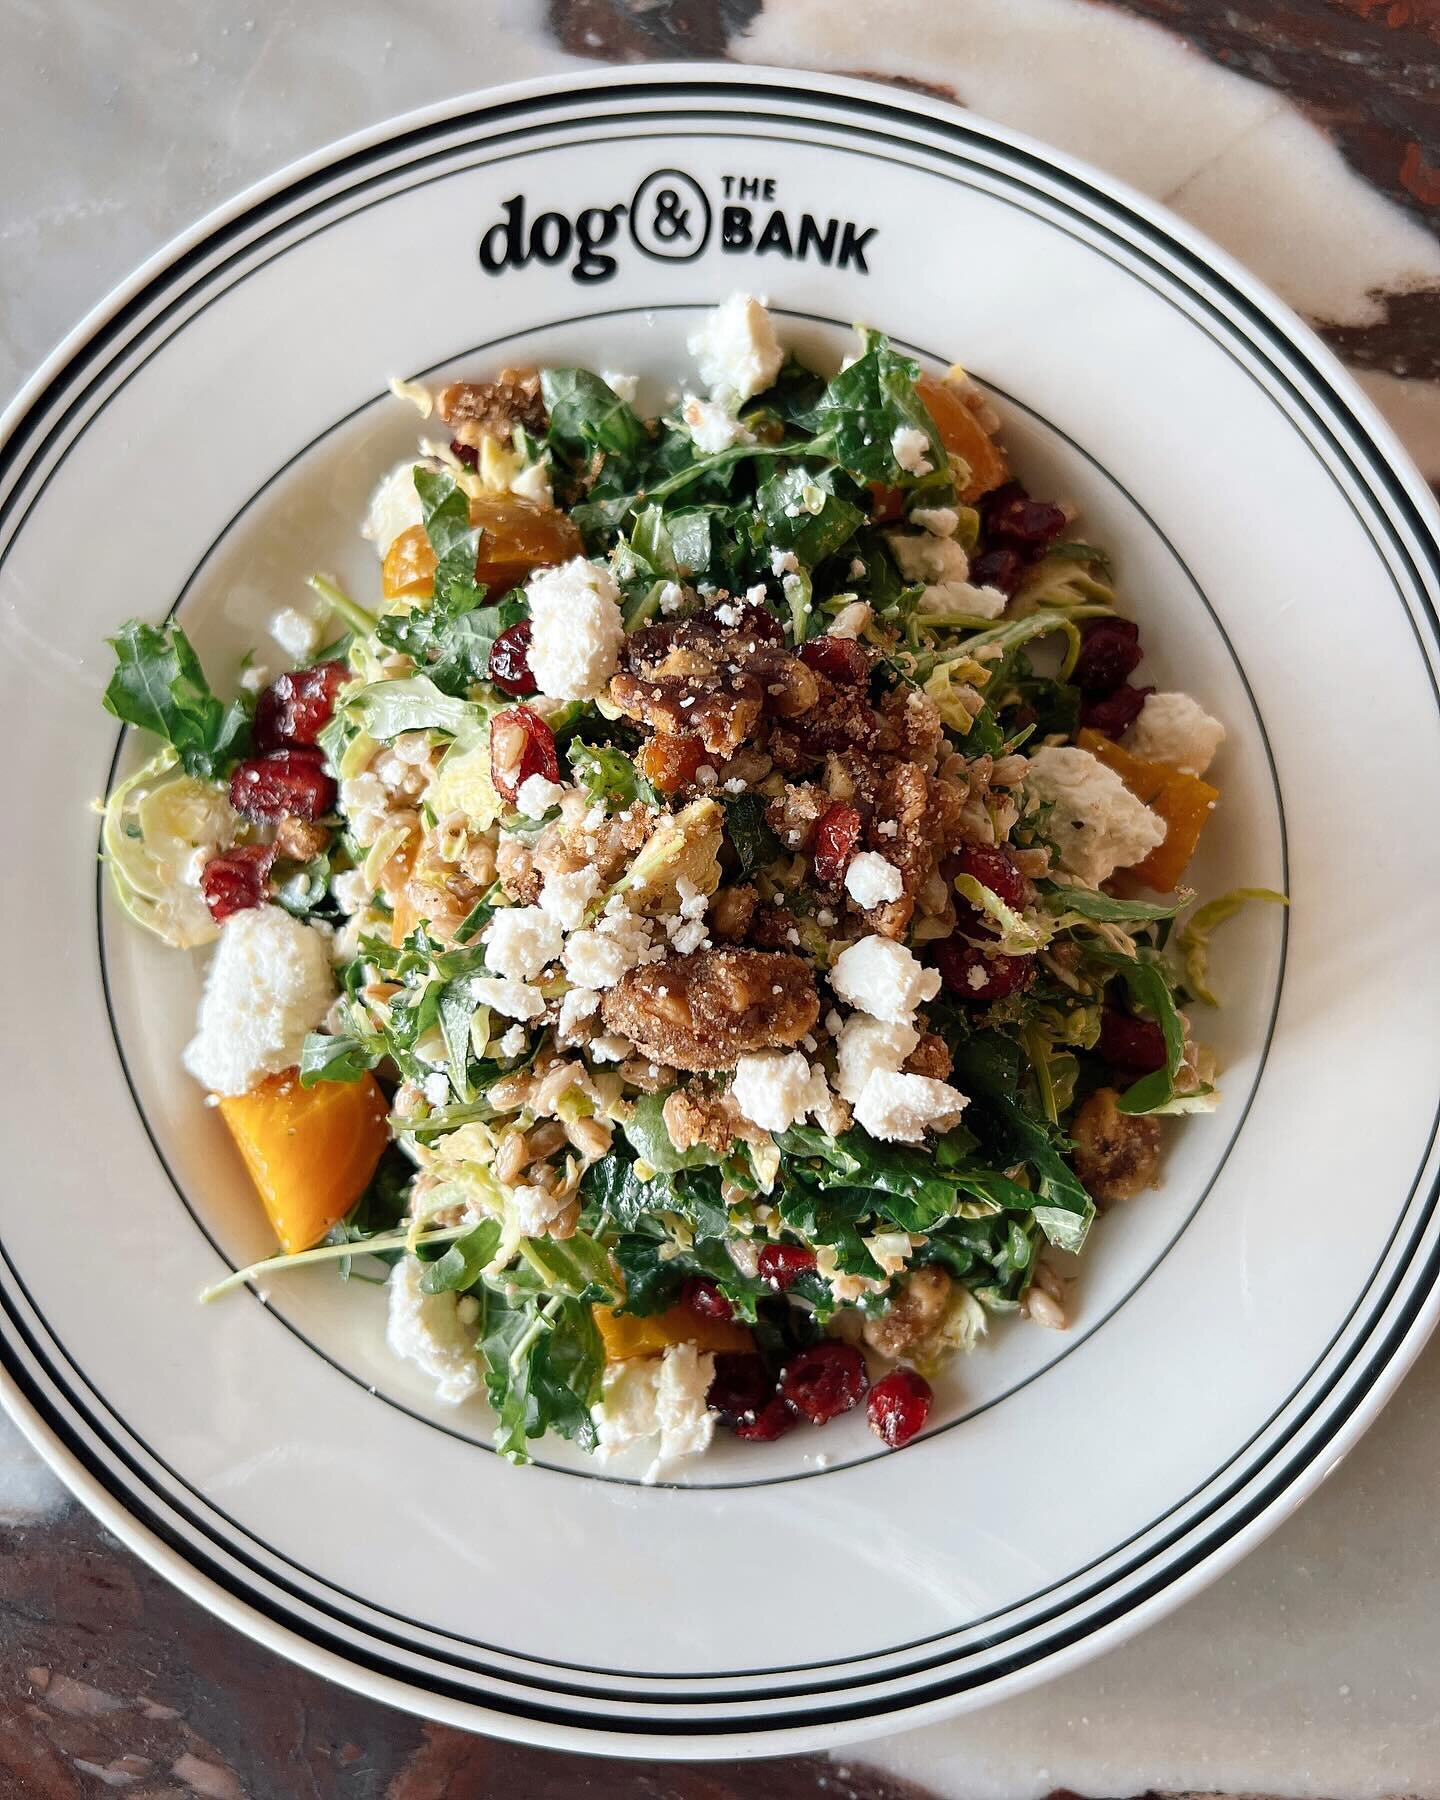 Who else needs some color on this dreary January day?! 🙋🏻&zwj;♀️ Winter Chopped Salad with Dried Cranberries, Red Wine Vinaigrette, Goat Cheese, Beets, Candied Walnuts, Kale, Brussel Sprouts &amp; Arugula Mix!